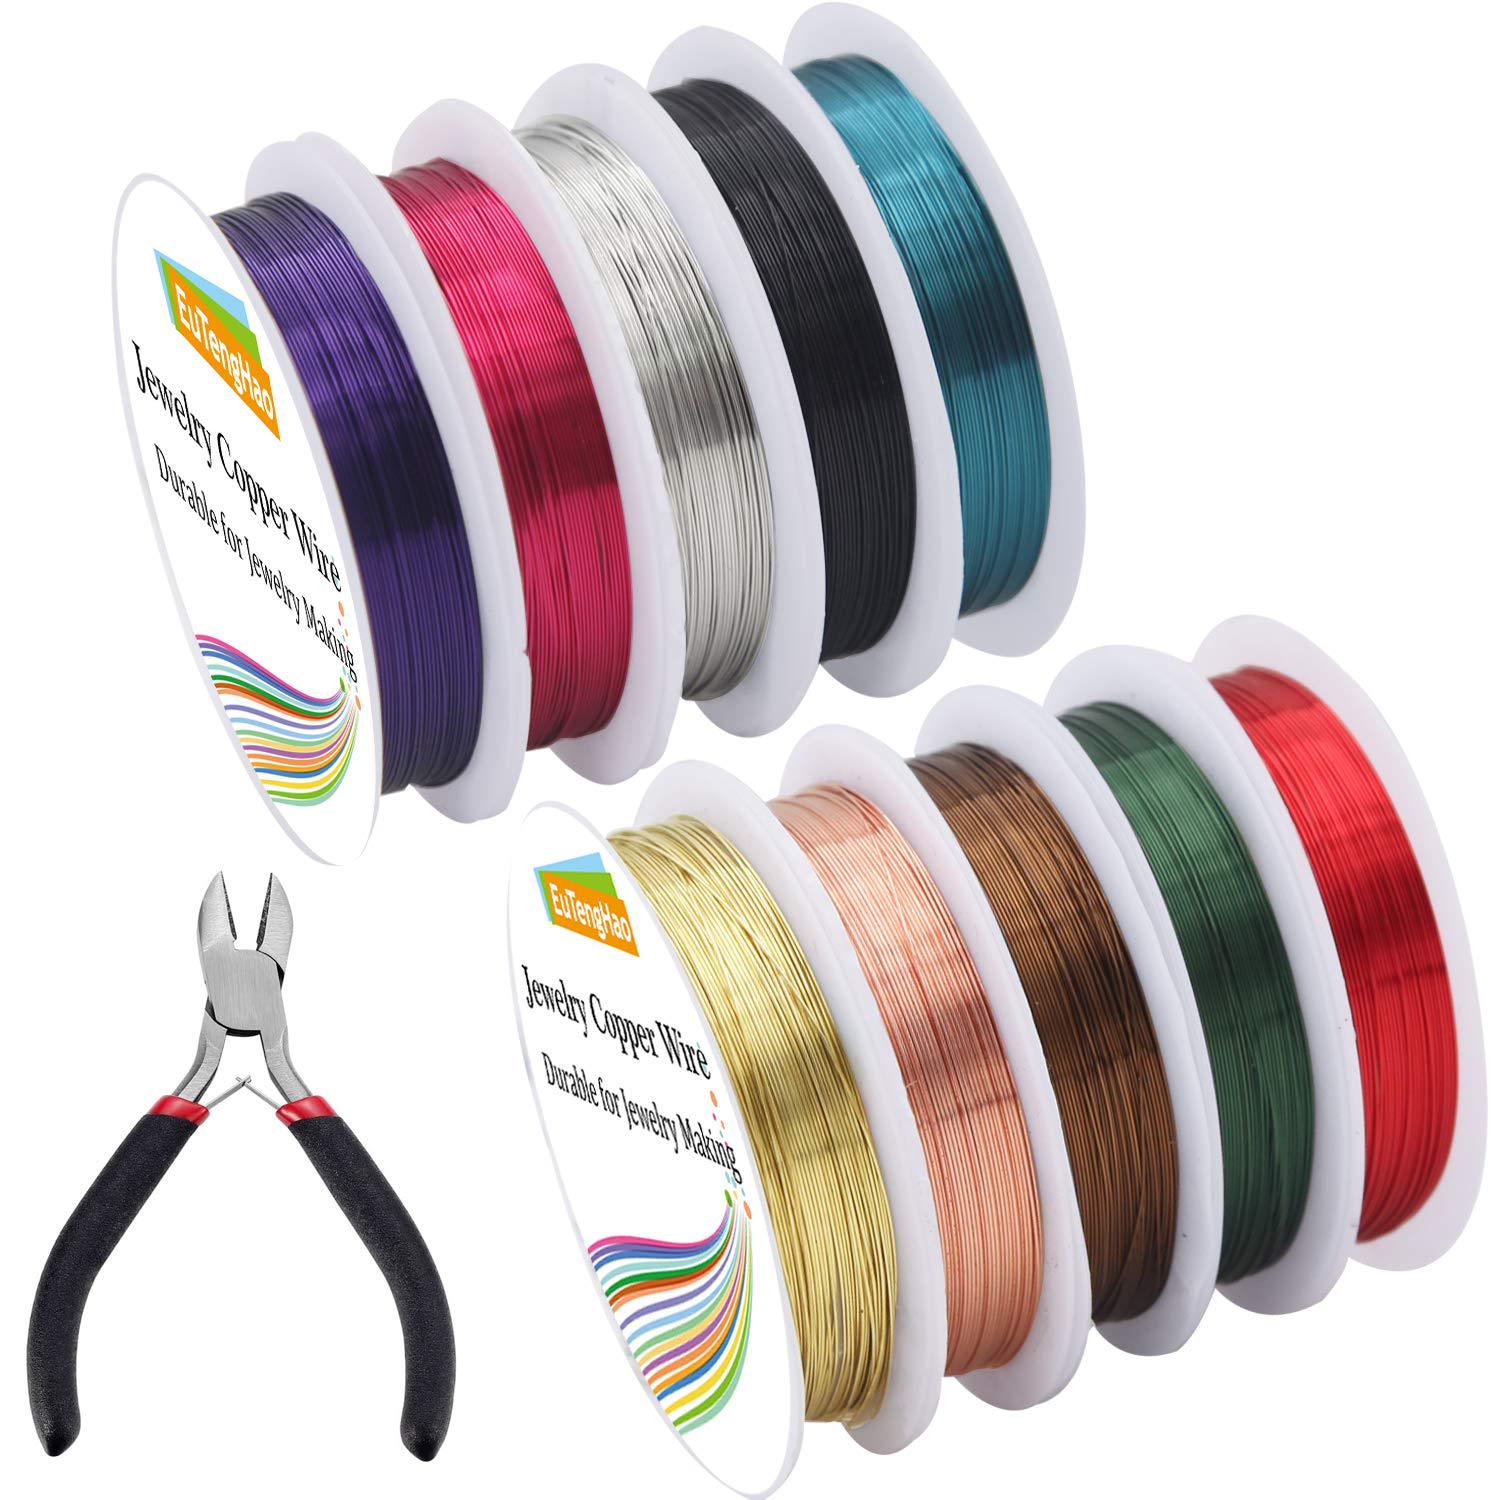 EuTengHao, EuTengHao 10 Packs Jewelry Copper Wire Craft Jewelry Beading Wire for Bracelet Necklaces Earring Jewelry Making Supplies (10 Colors,26 Gauge)